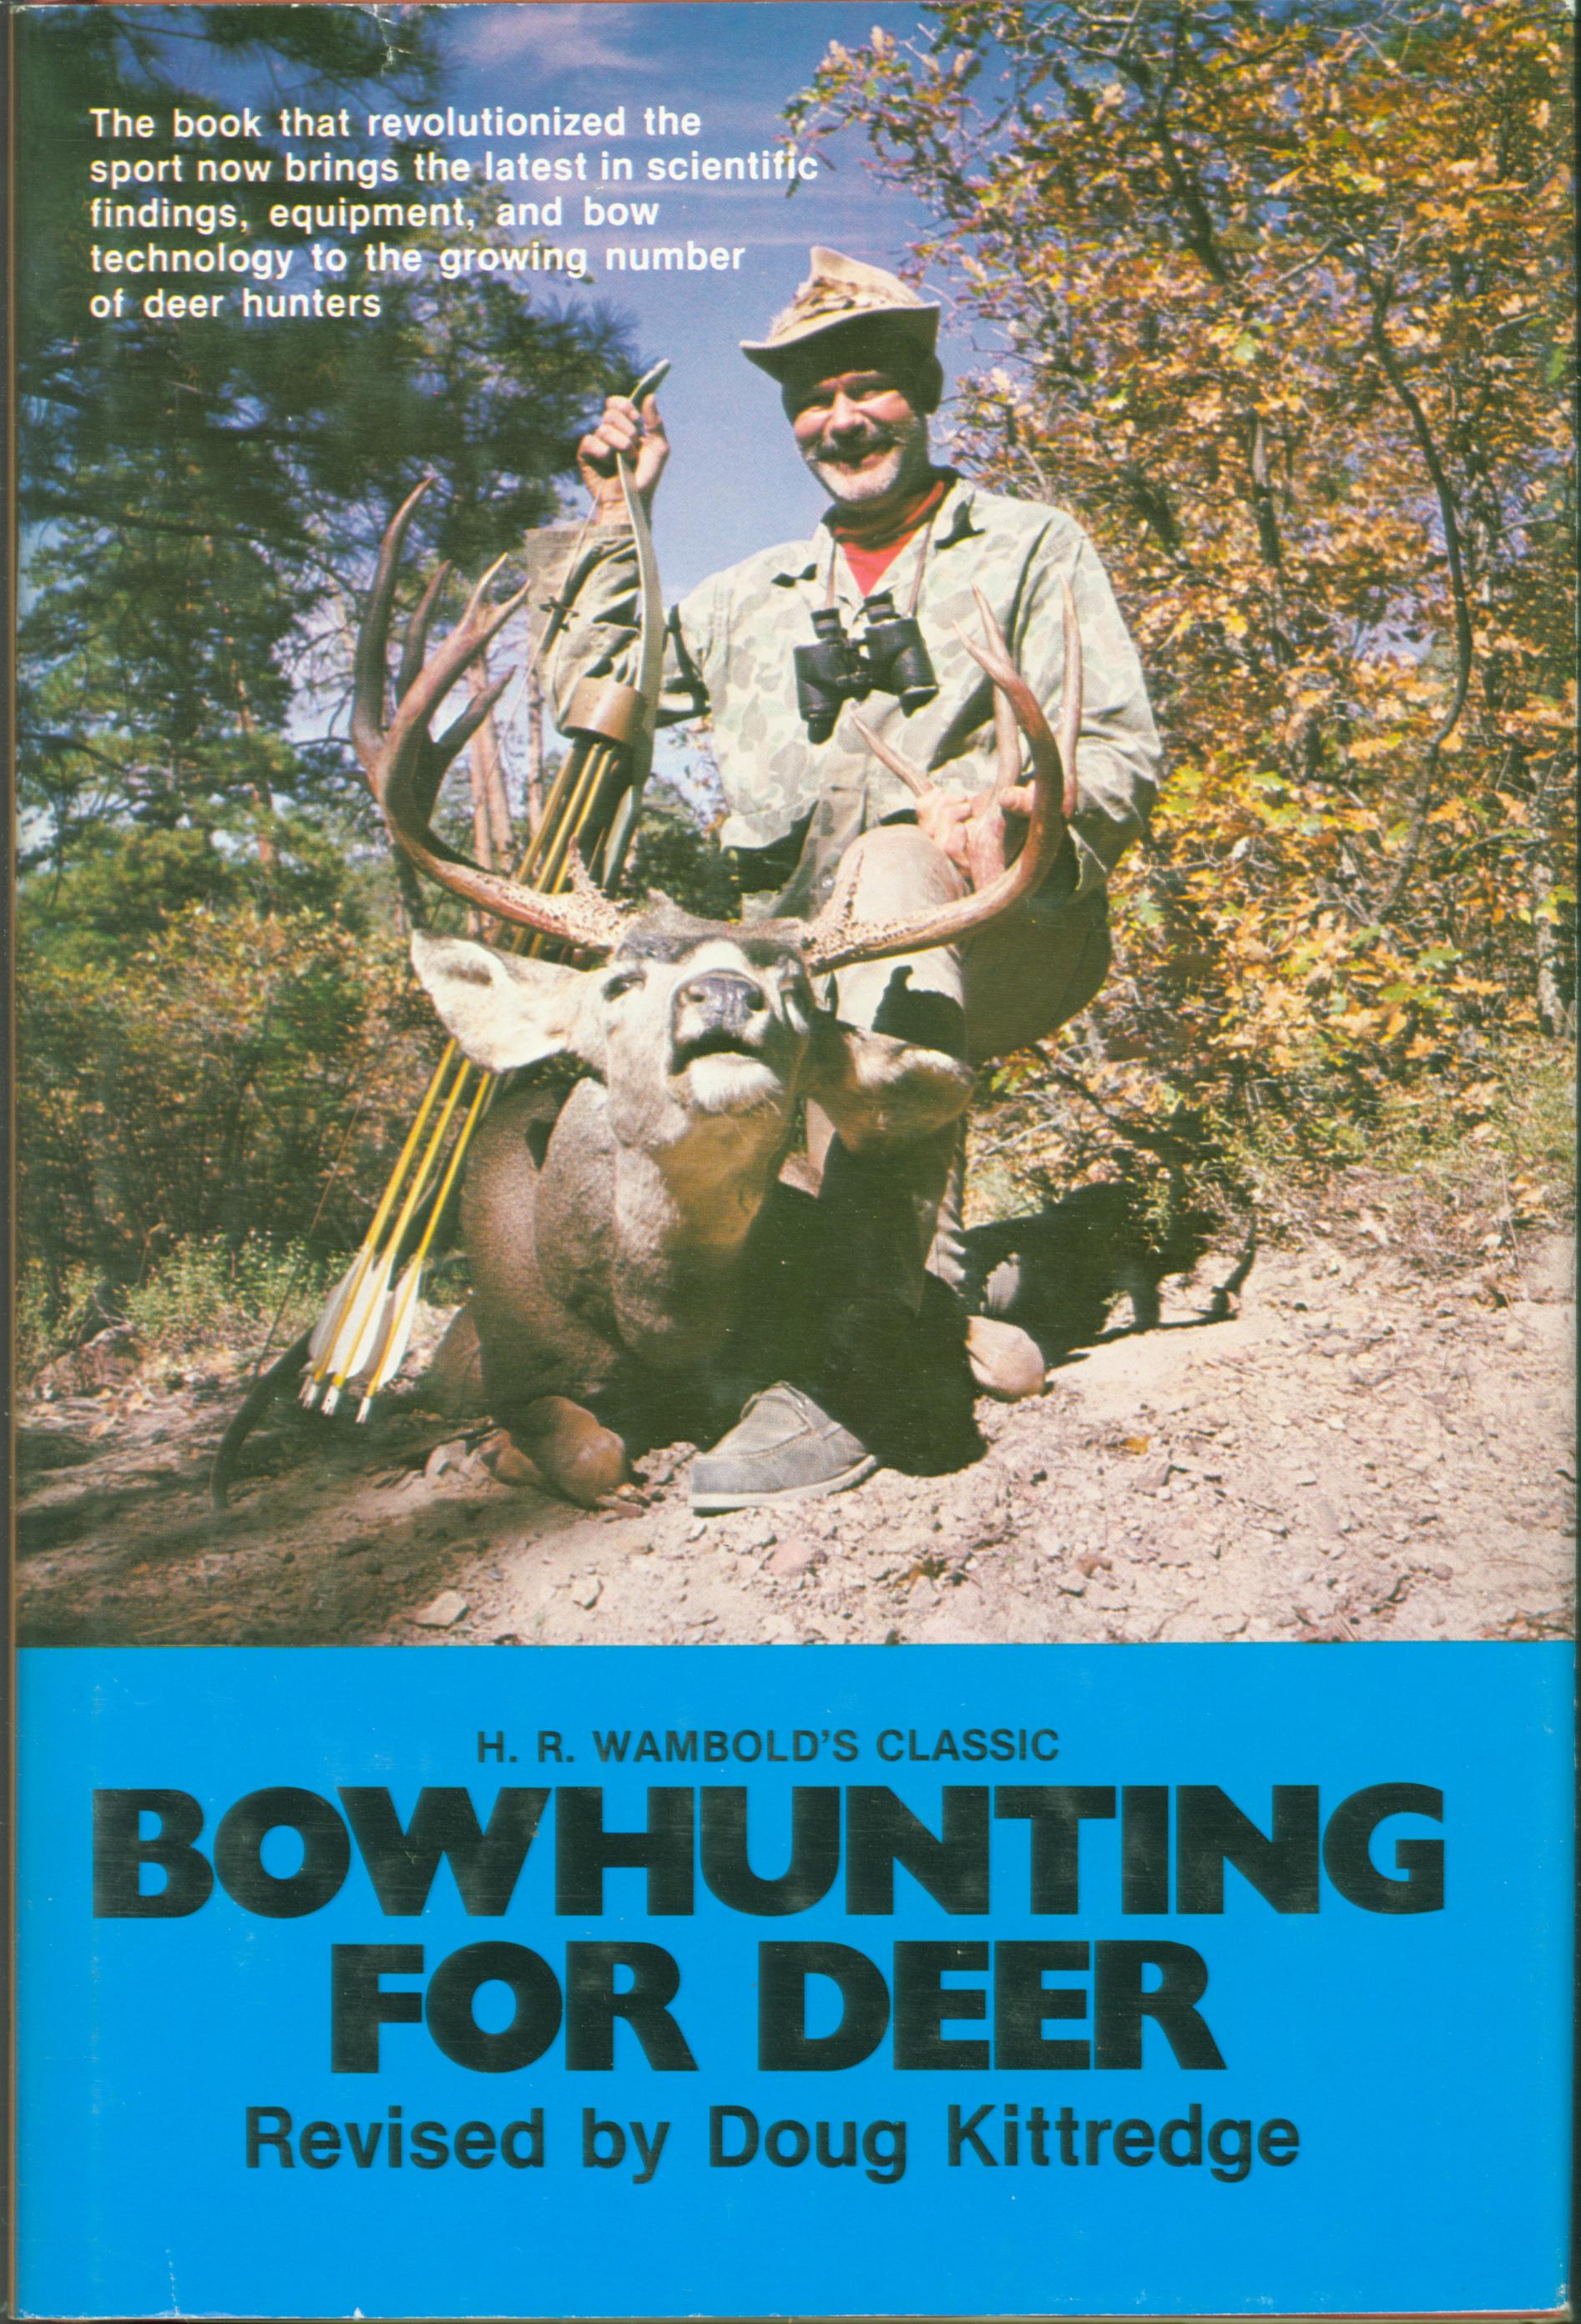 BOWHUNTING FOR DEER.